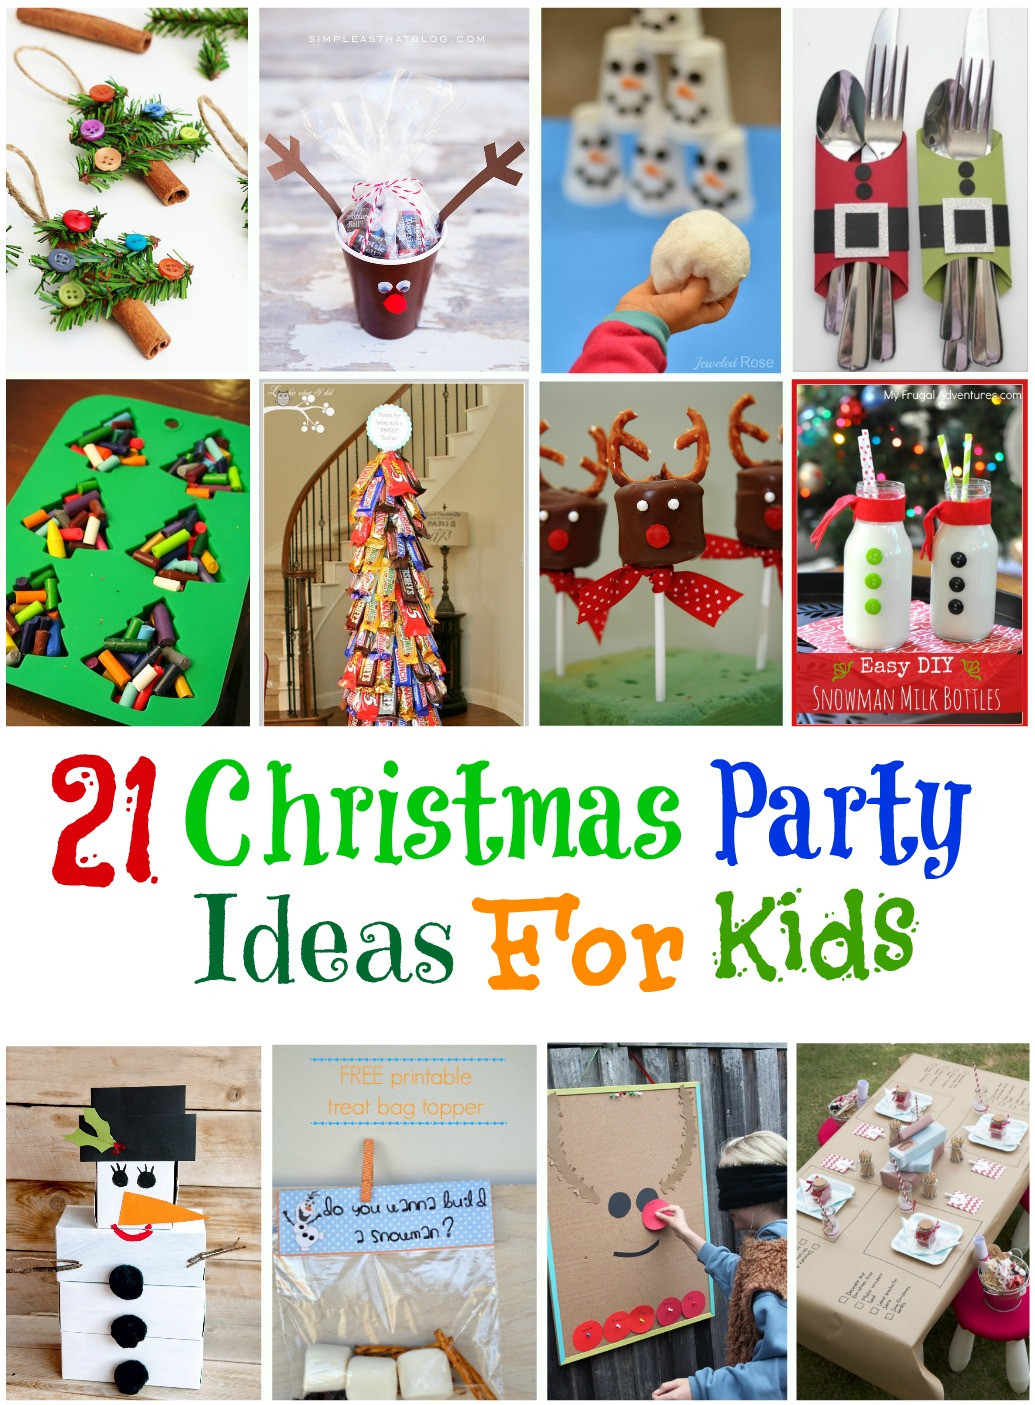 Toddler Christmas Party Ideas
 21 Amazing Christmas Party Ideas for Kids